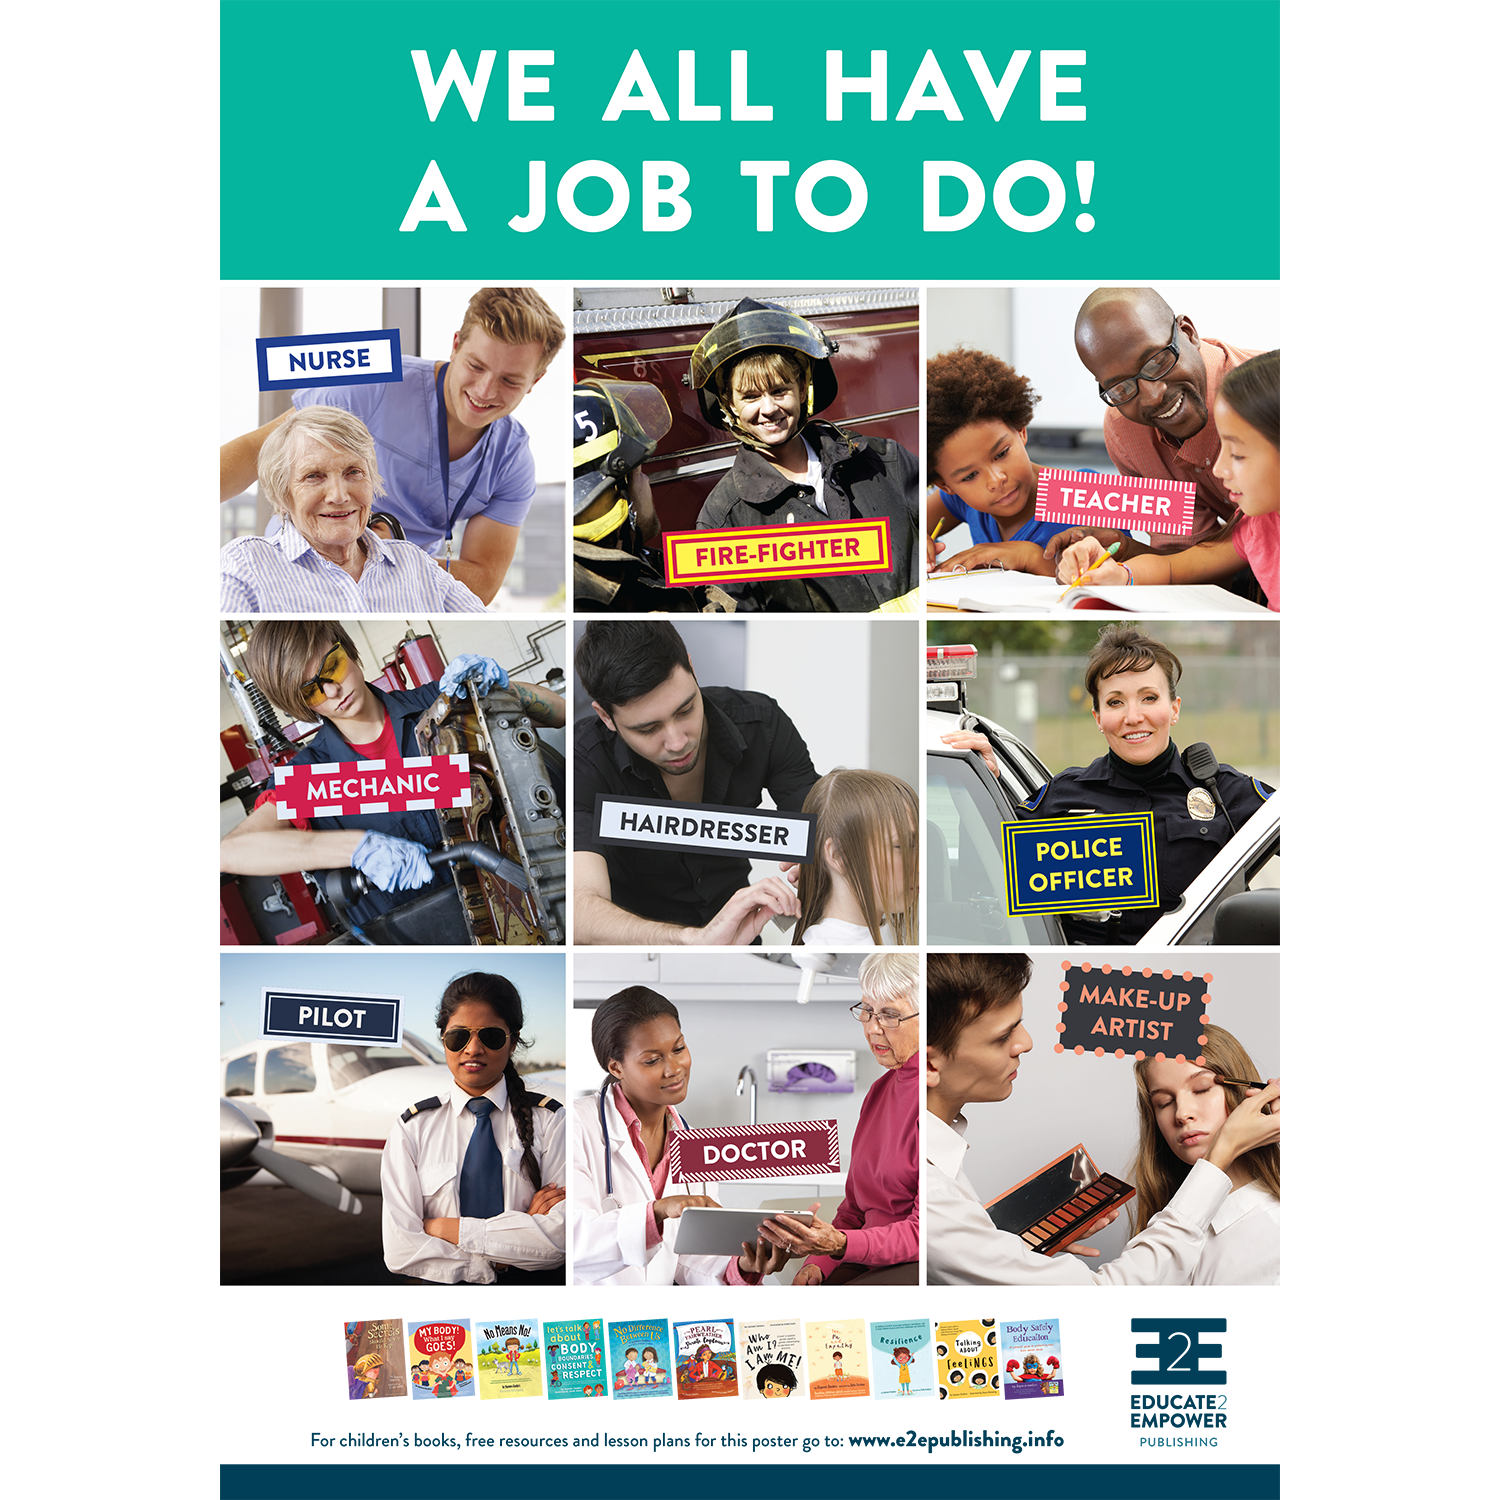 A poster for children titled 'We All Have A Job To Do!' containing people working in occupations that are contrary to historical gender roles.